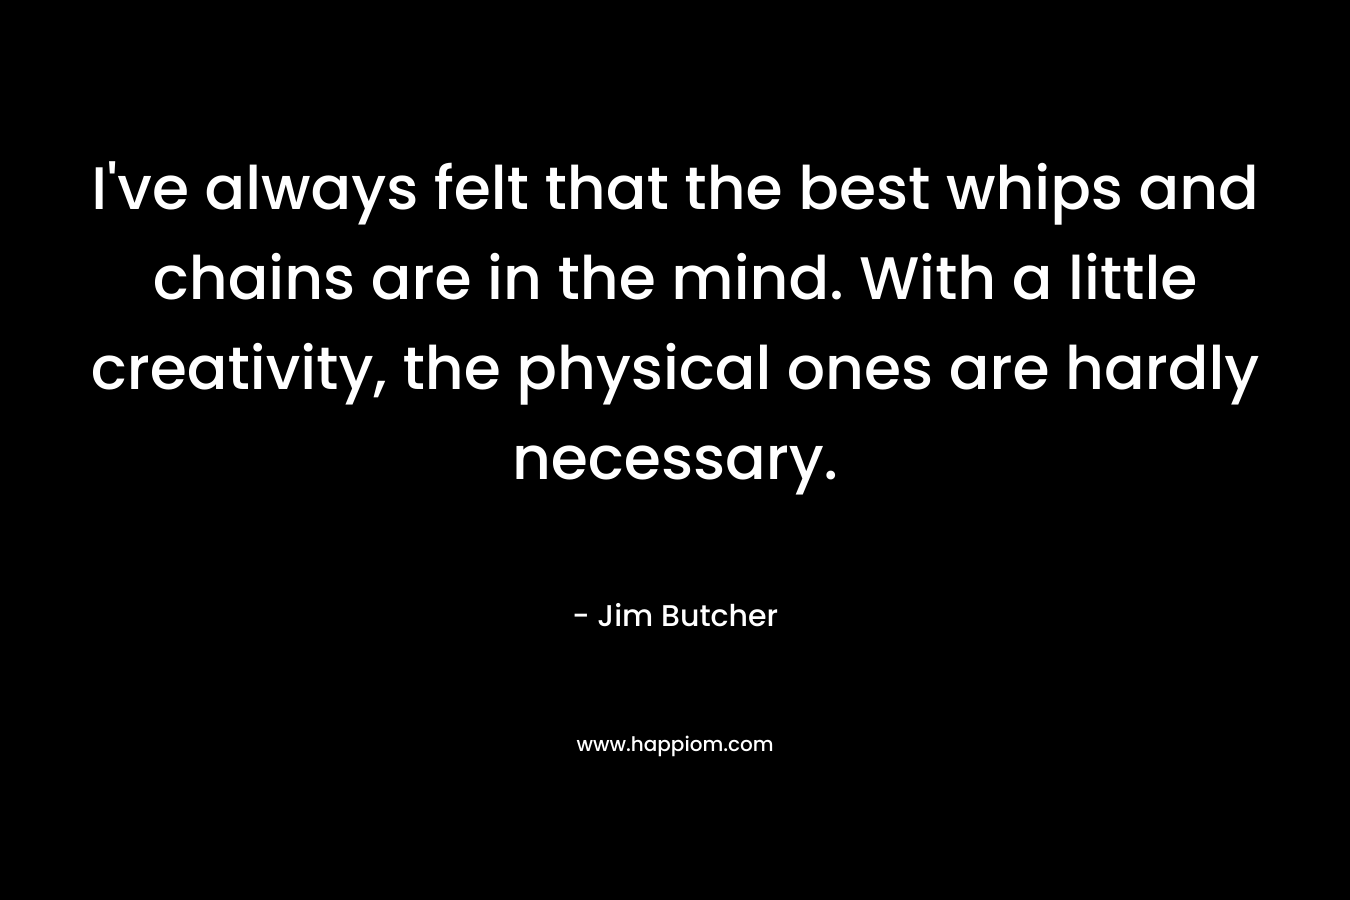 I’ve always felt that the best whips and chains are in the mind. With a little creativity, the physical ones are hardly necessary. – Jim Butcher